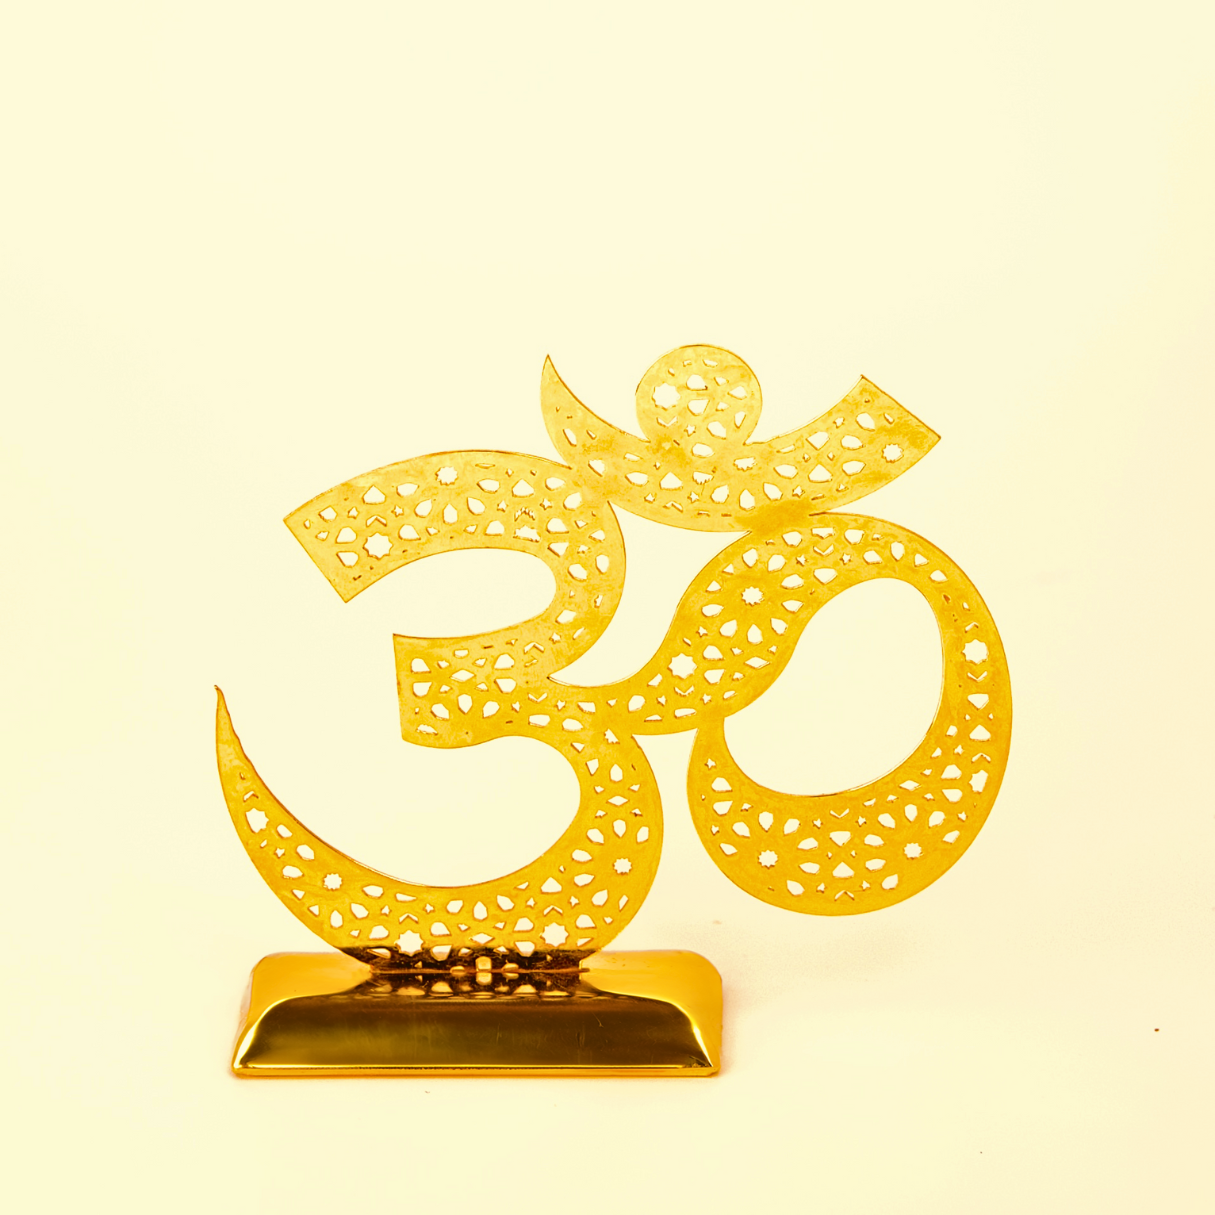 OM echoA beautifully crafted accessory, perfect for adding blessings and grace to your car's dashboard, serving as a decorative centerpiece on your table, or even adding chHindustanwaleOM echo